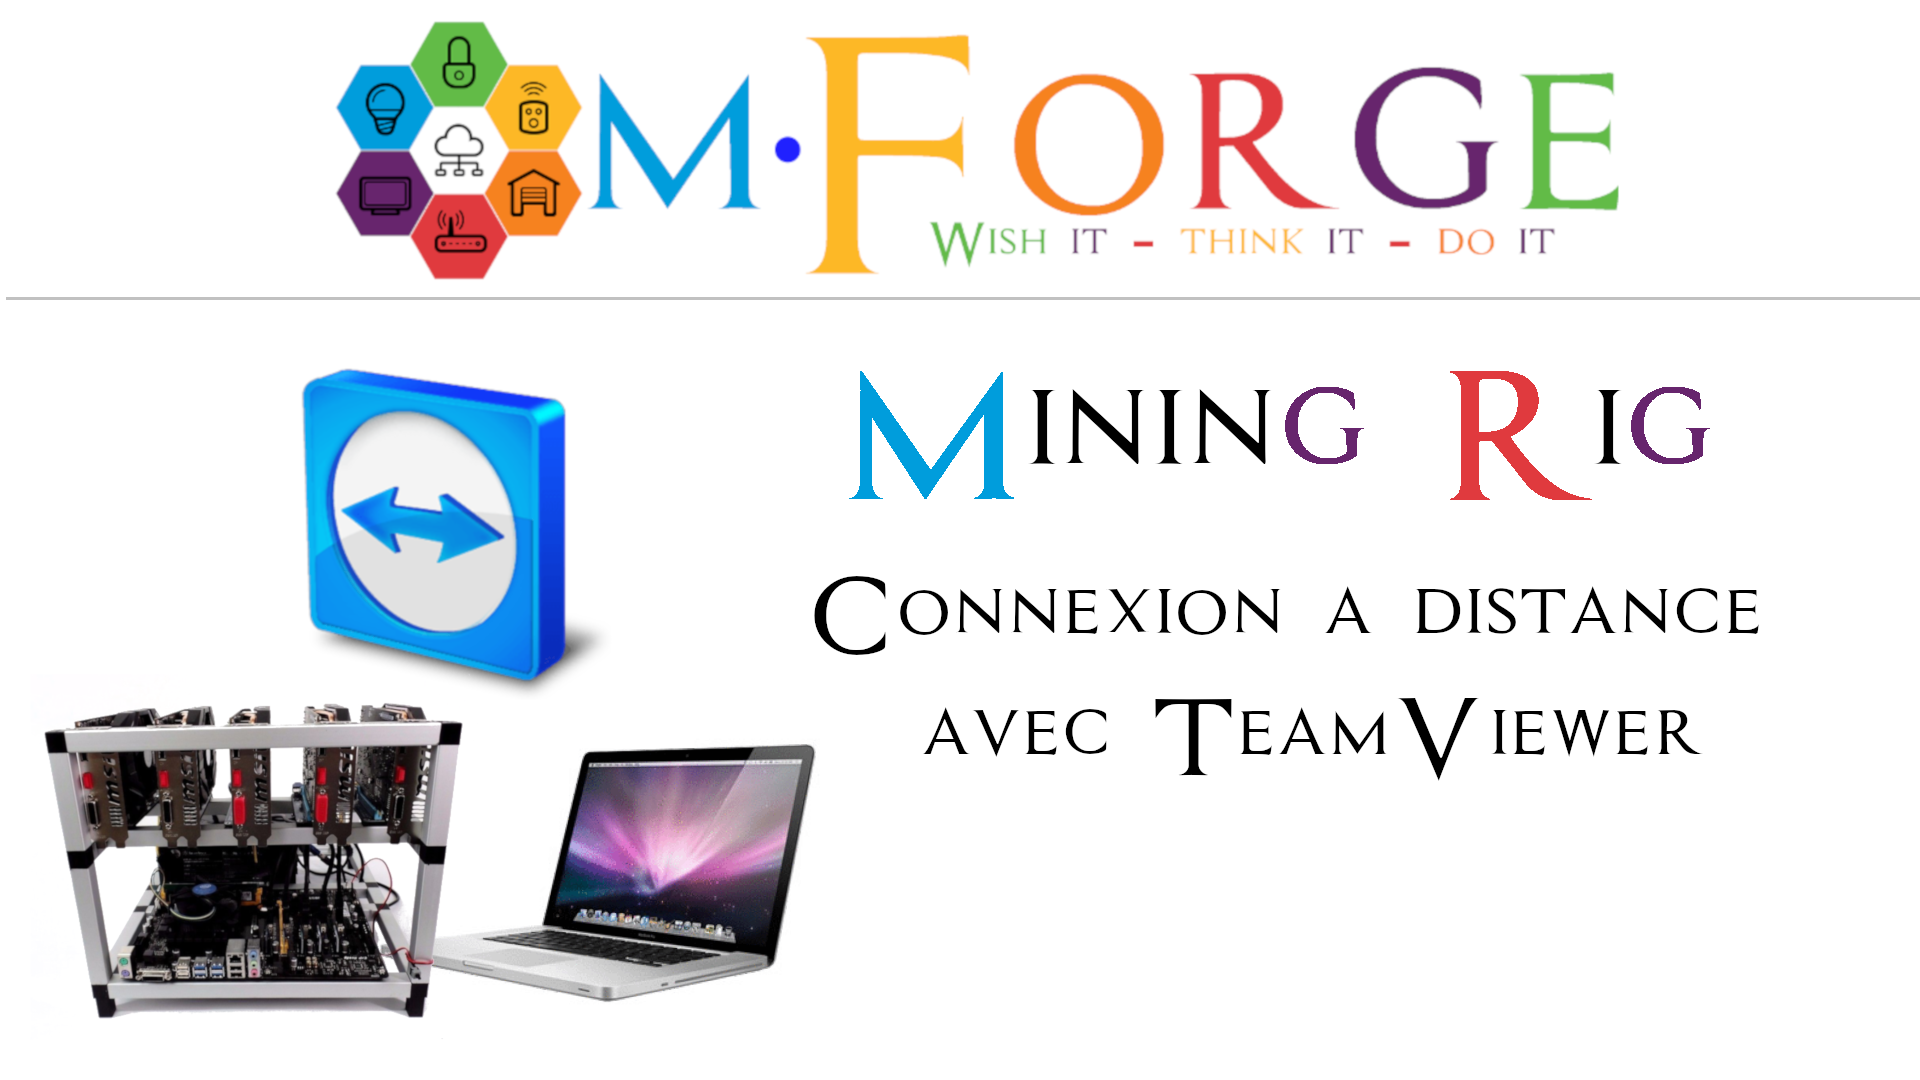 Rig – Remote desktop with TeamViewer – Crypto mining